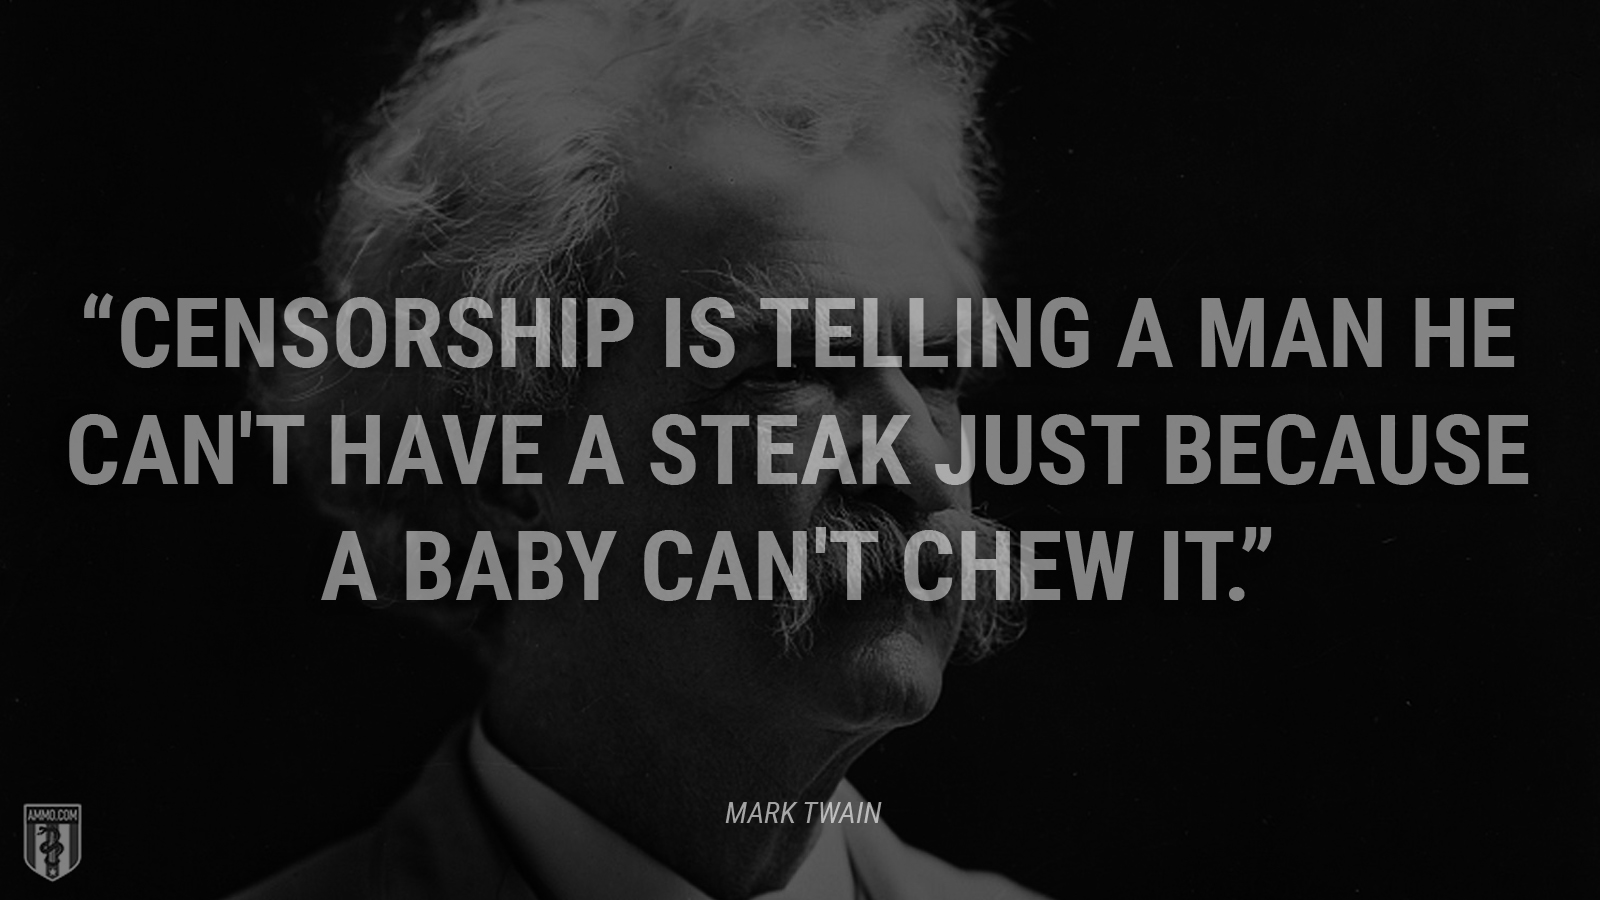 “Censorship is telling a man he can't have a steak just because a baby can't chew it.” - Mark Twain